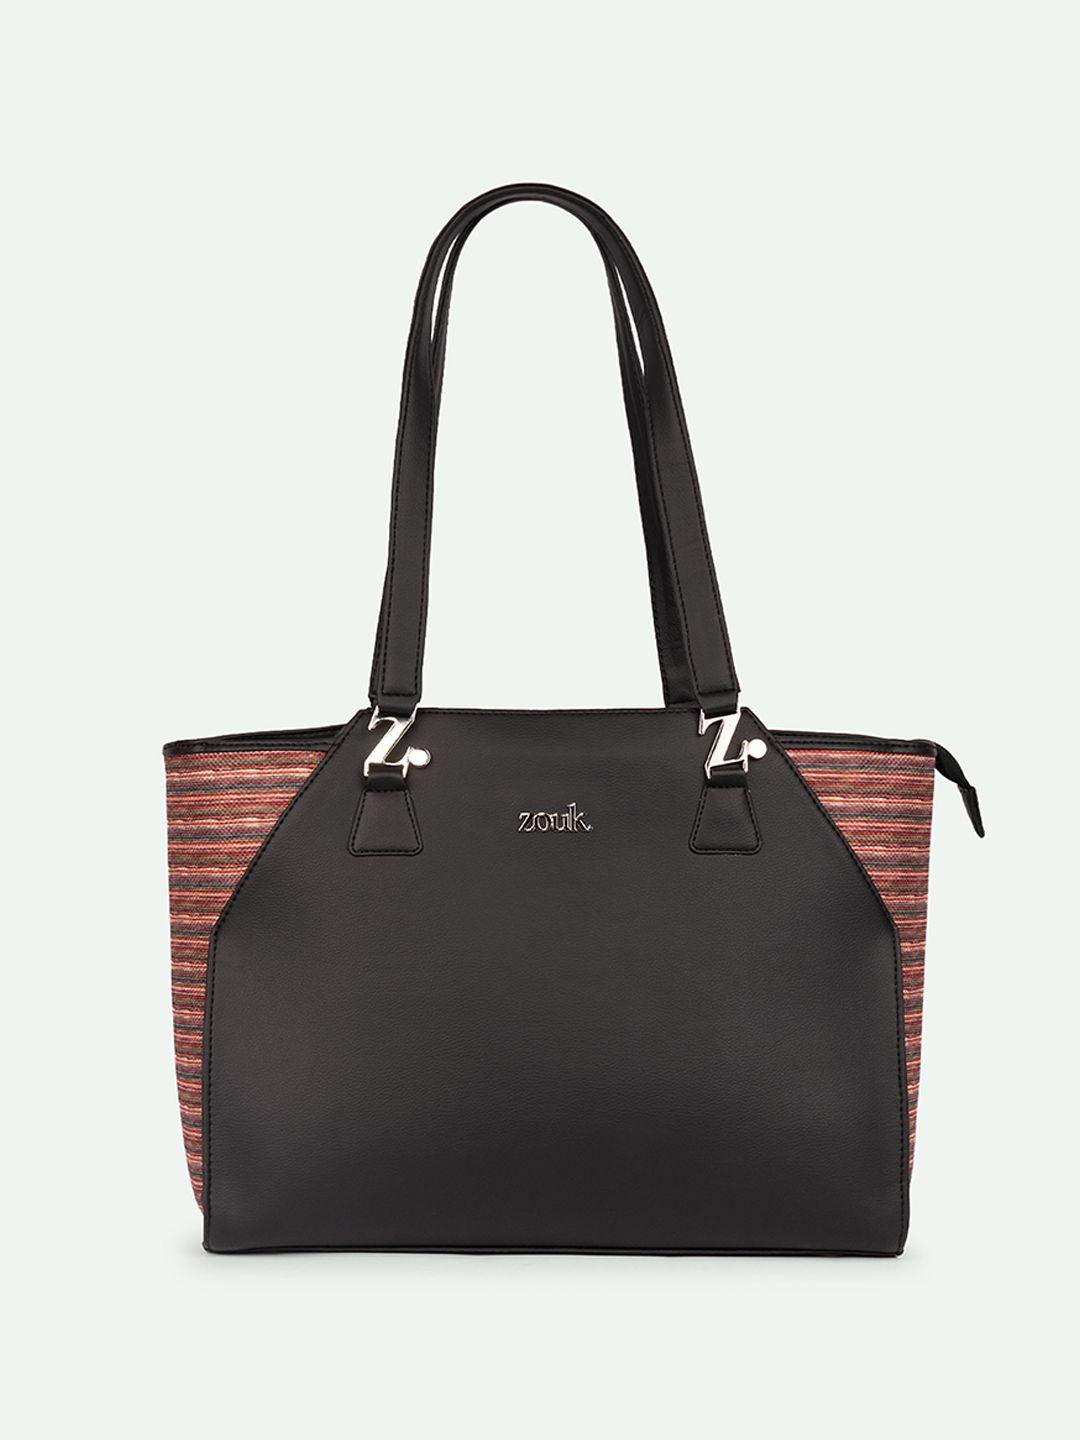 zouk structured handheld bag with bow detail